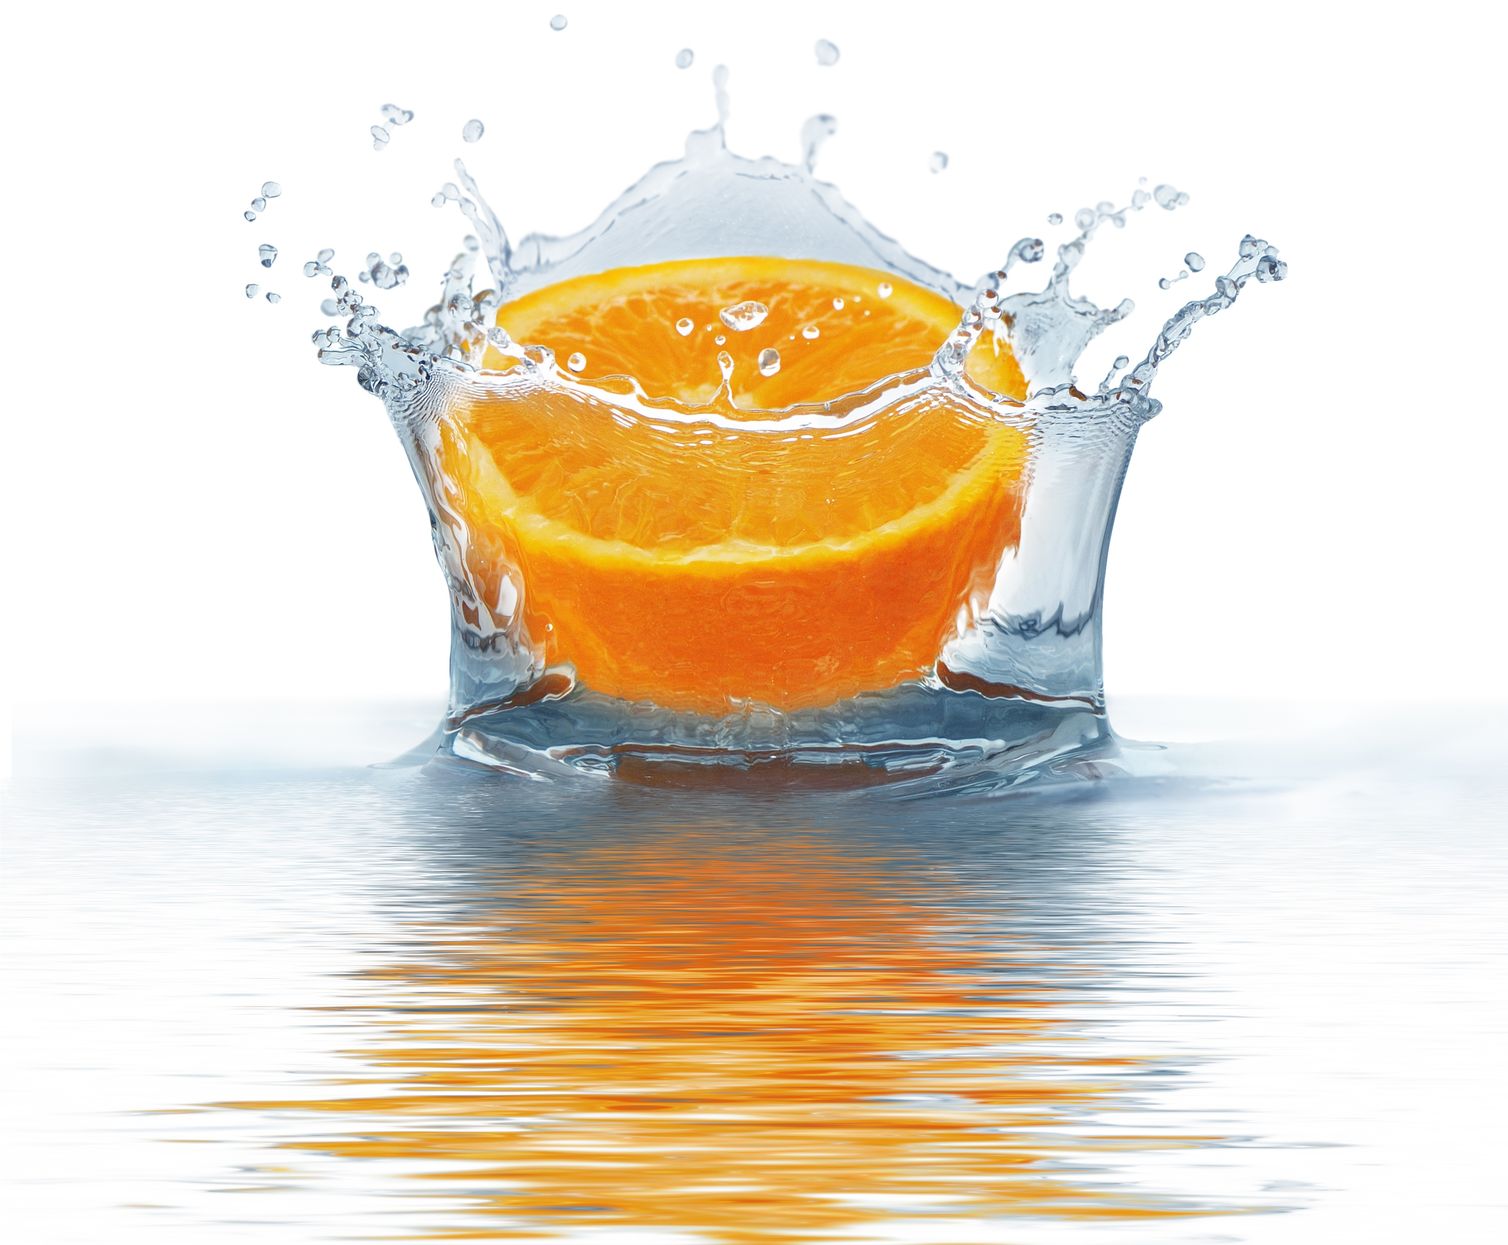 9027829 - orange falls into the water isolated on a white background. splash water.